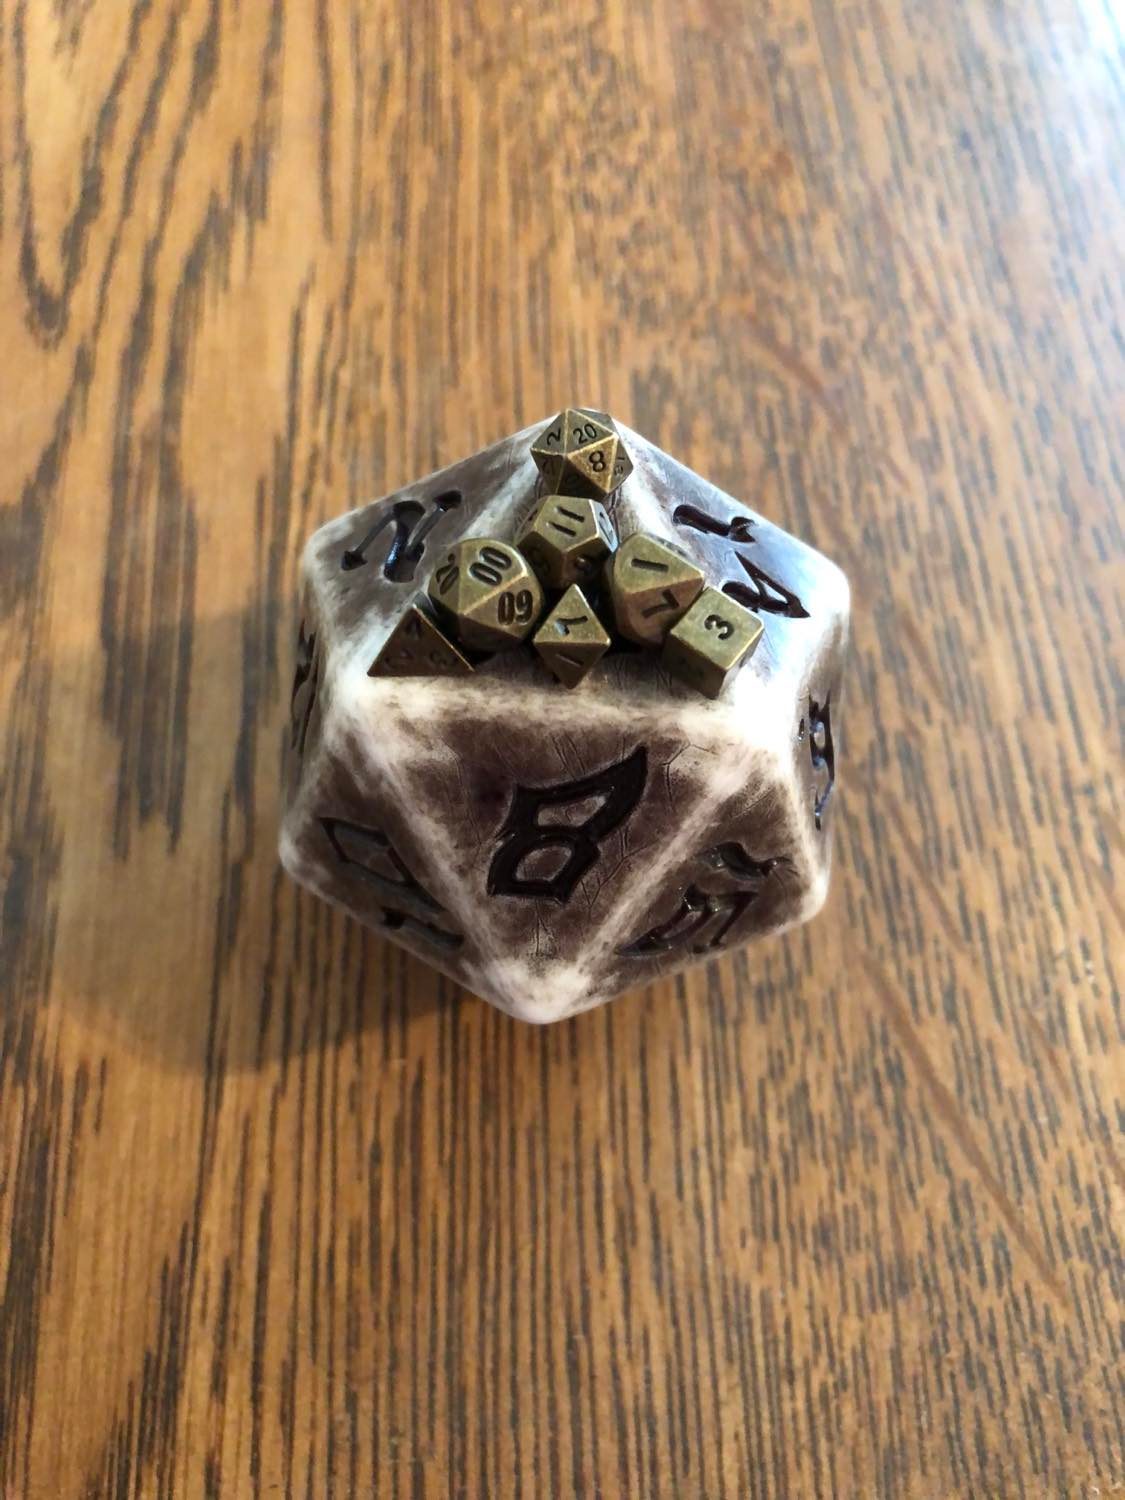 The seven micro dice all fitting on a single giant d20 face.